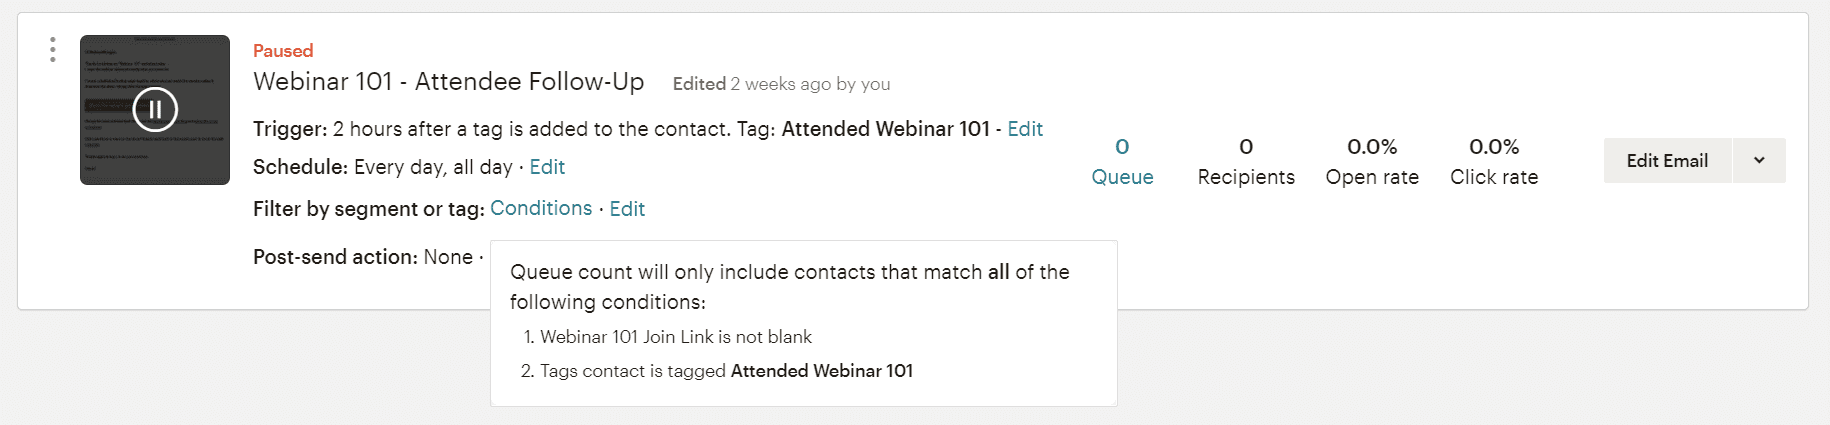 Conditions for sending a Webinar Follow-up for Attendees with MailChimp